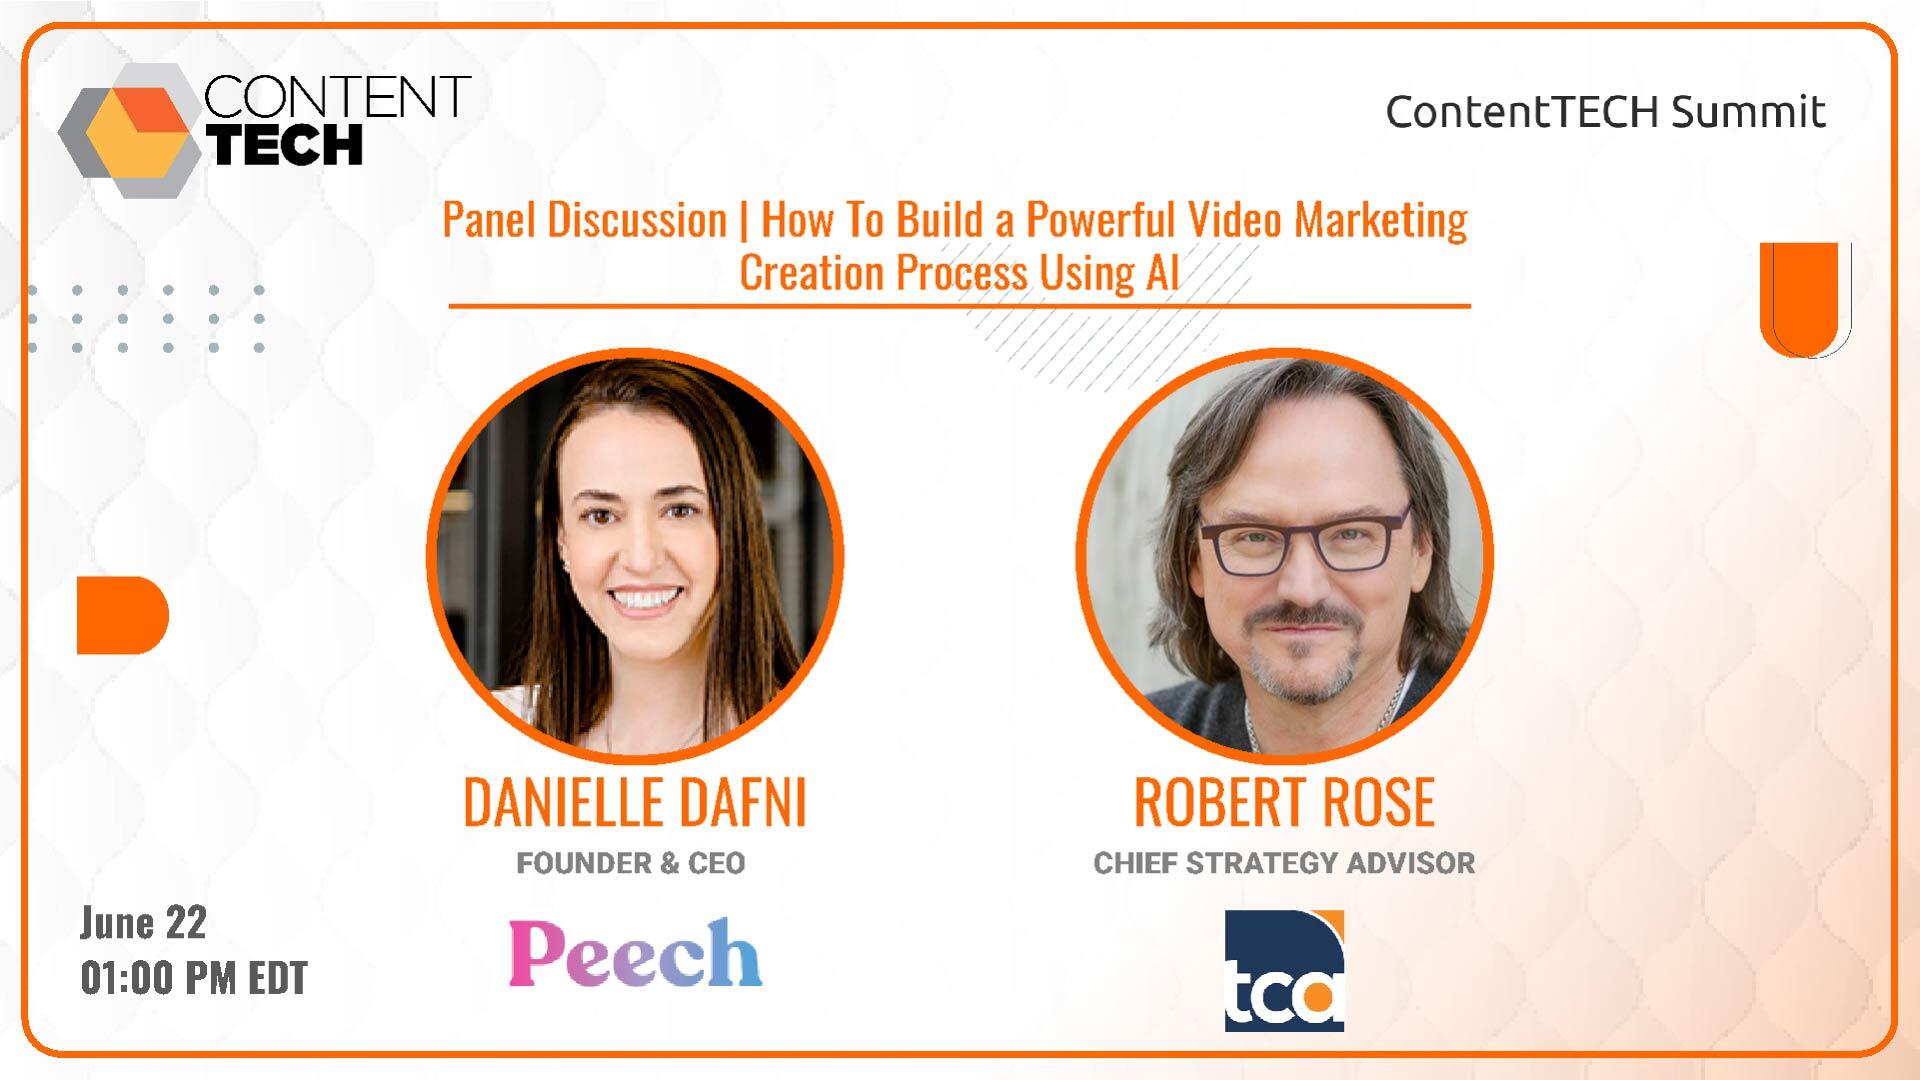 ContentTECH Summit - How to Build a Powerful Video Marketing Creation Process Using AI